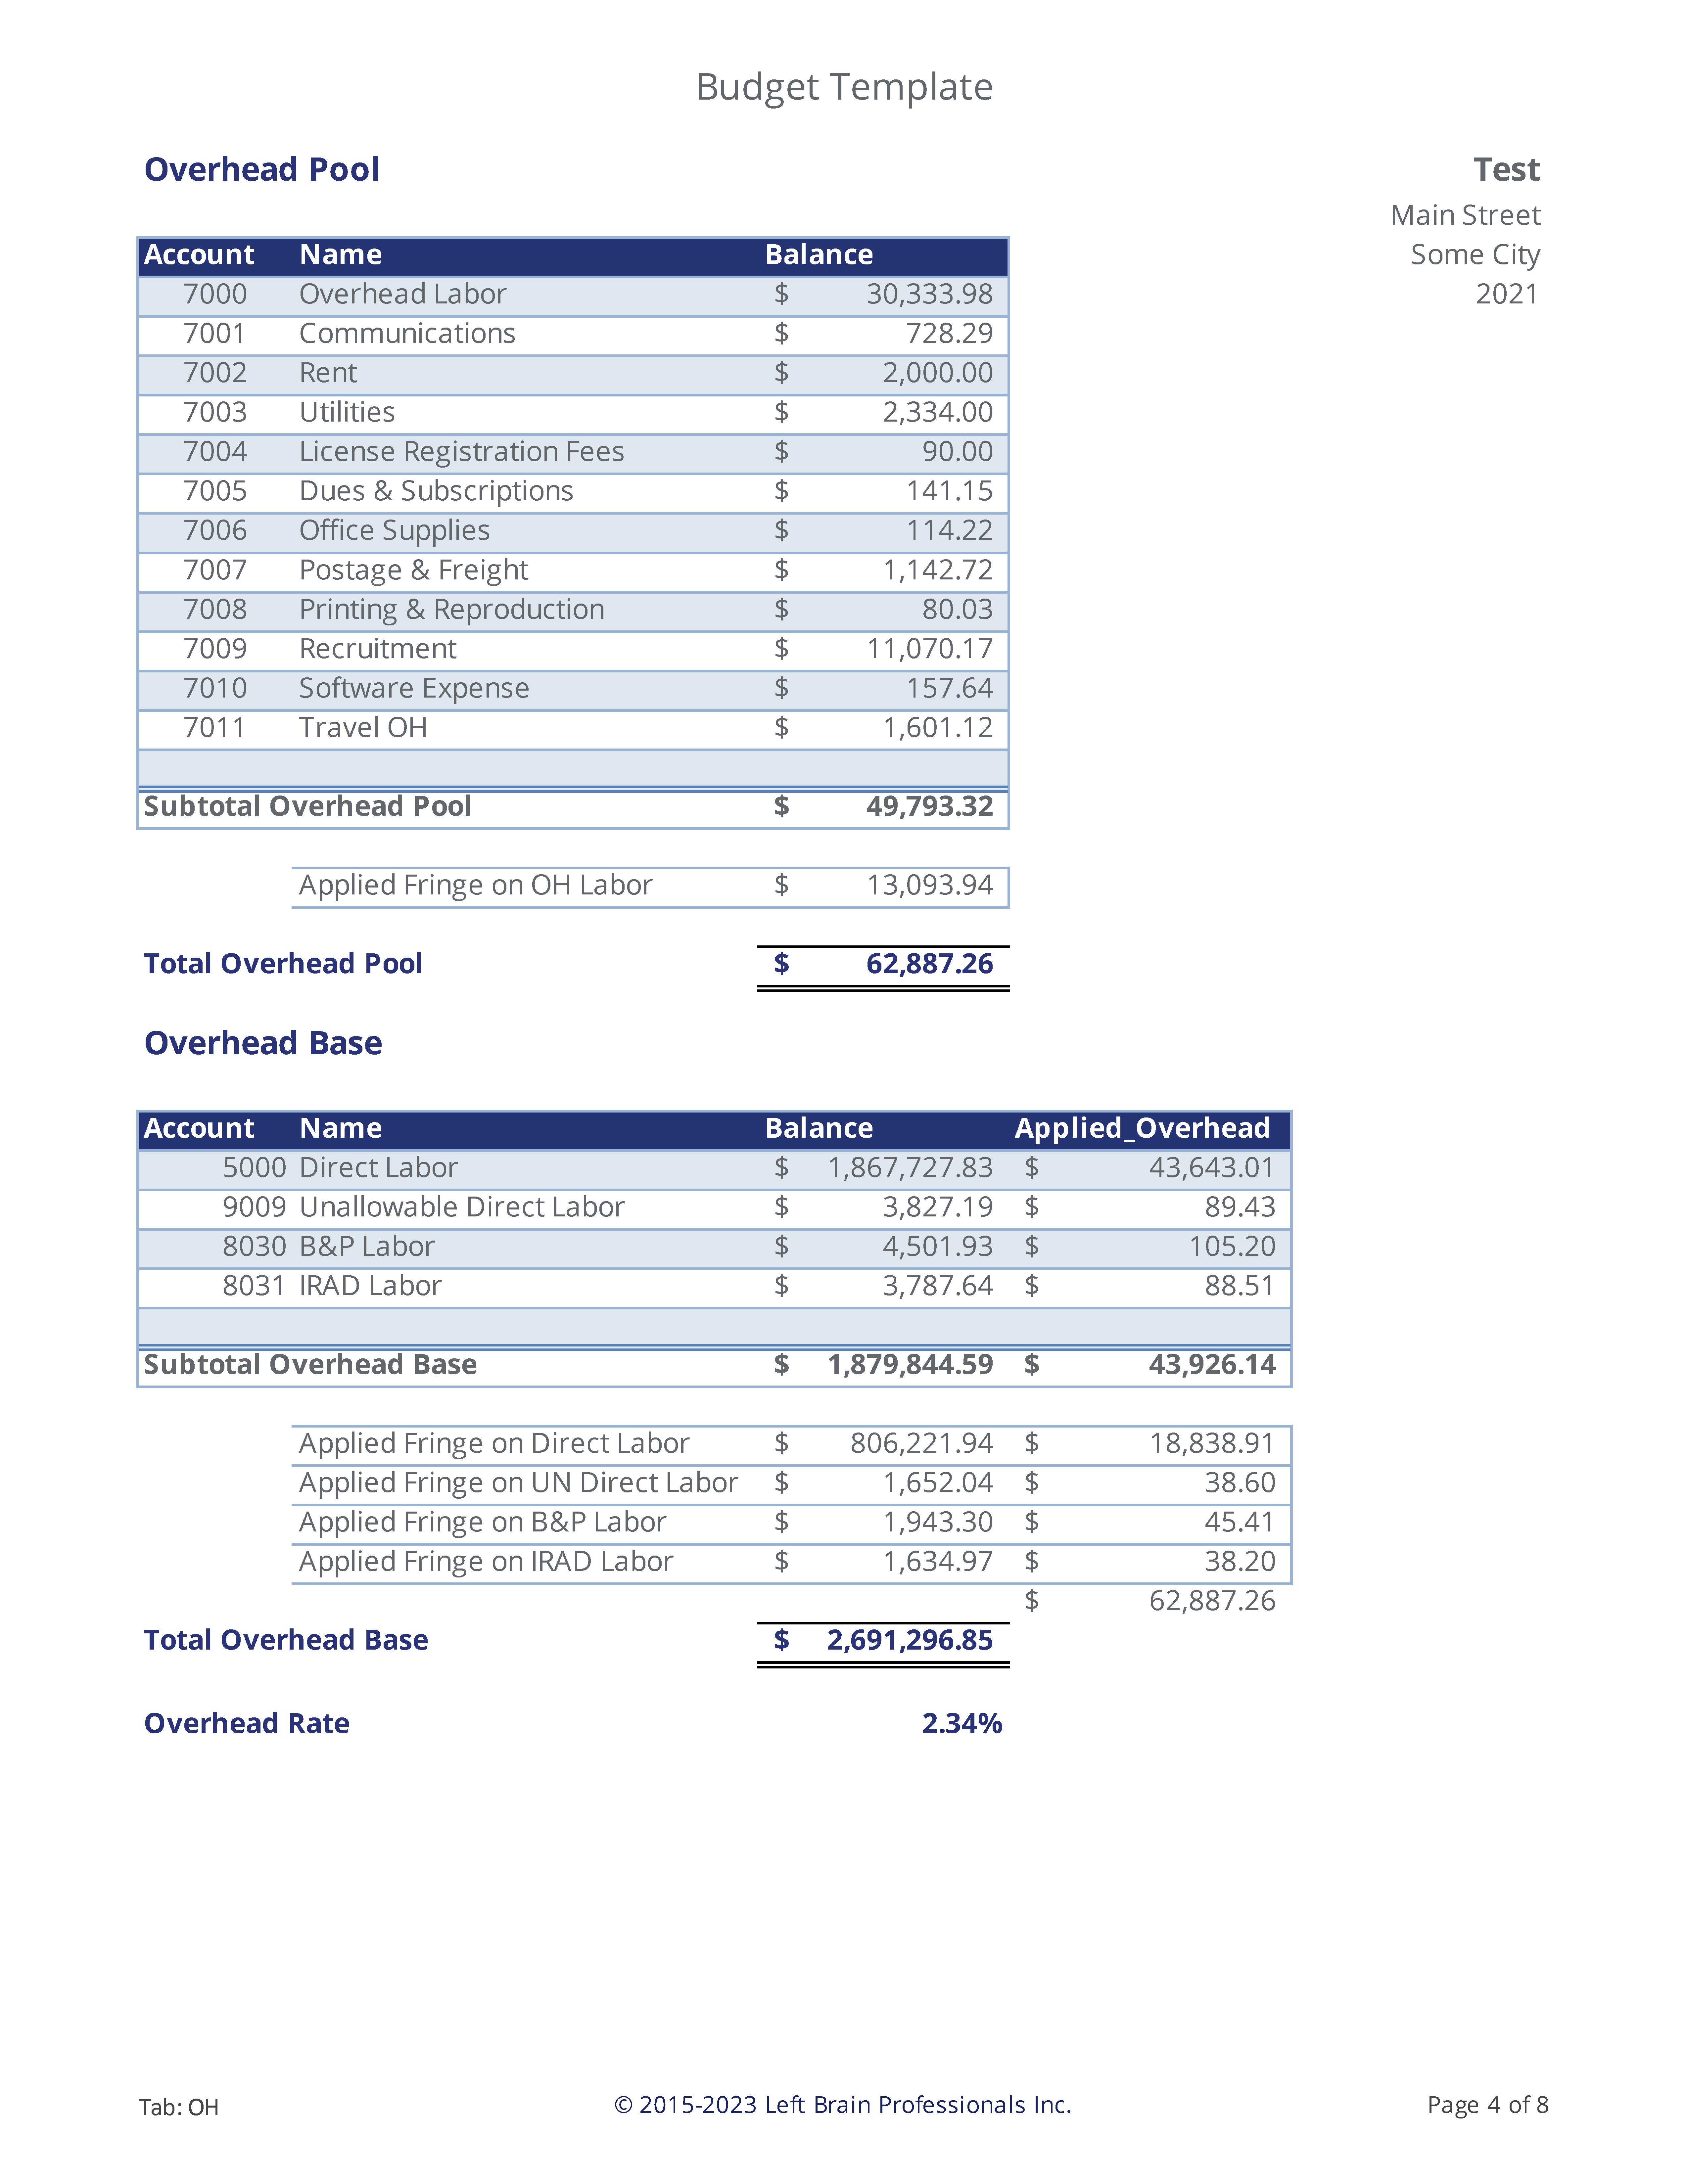 Budget Page 4